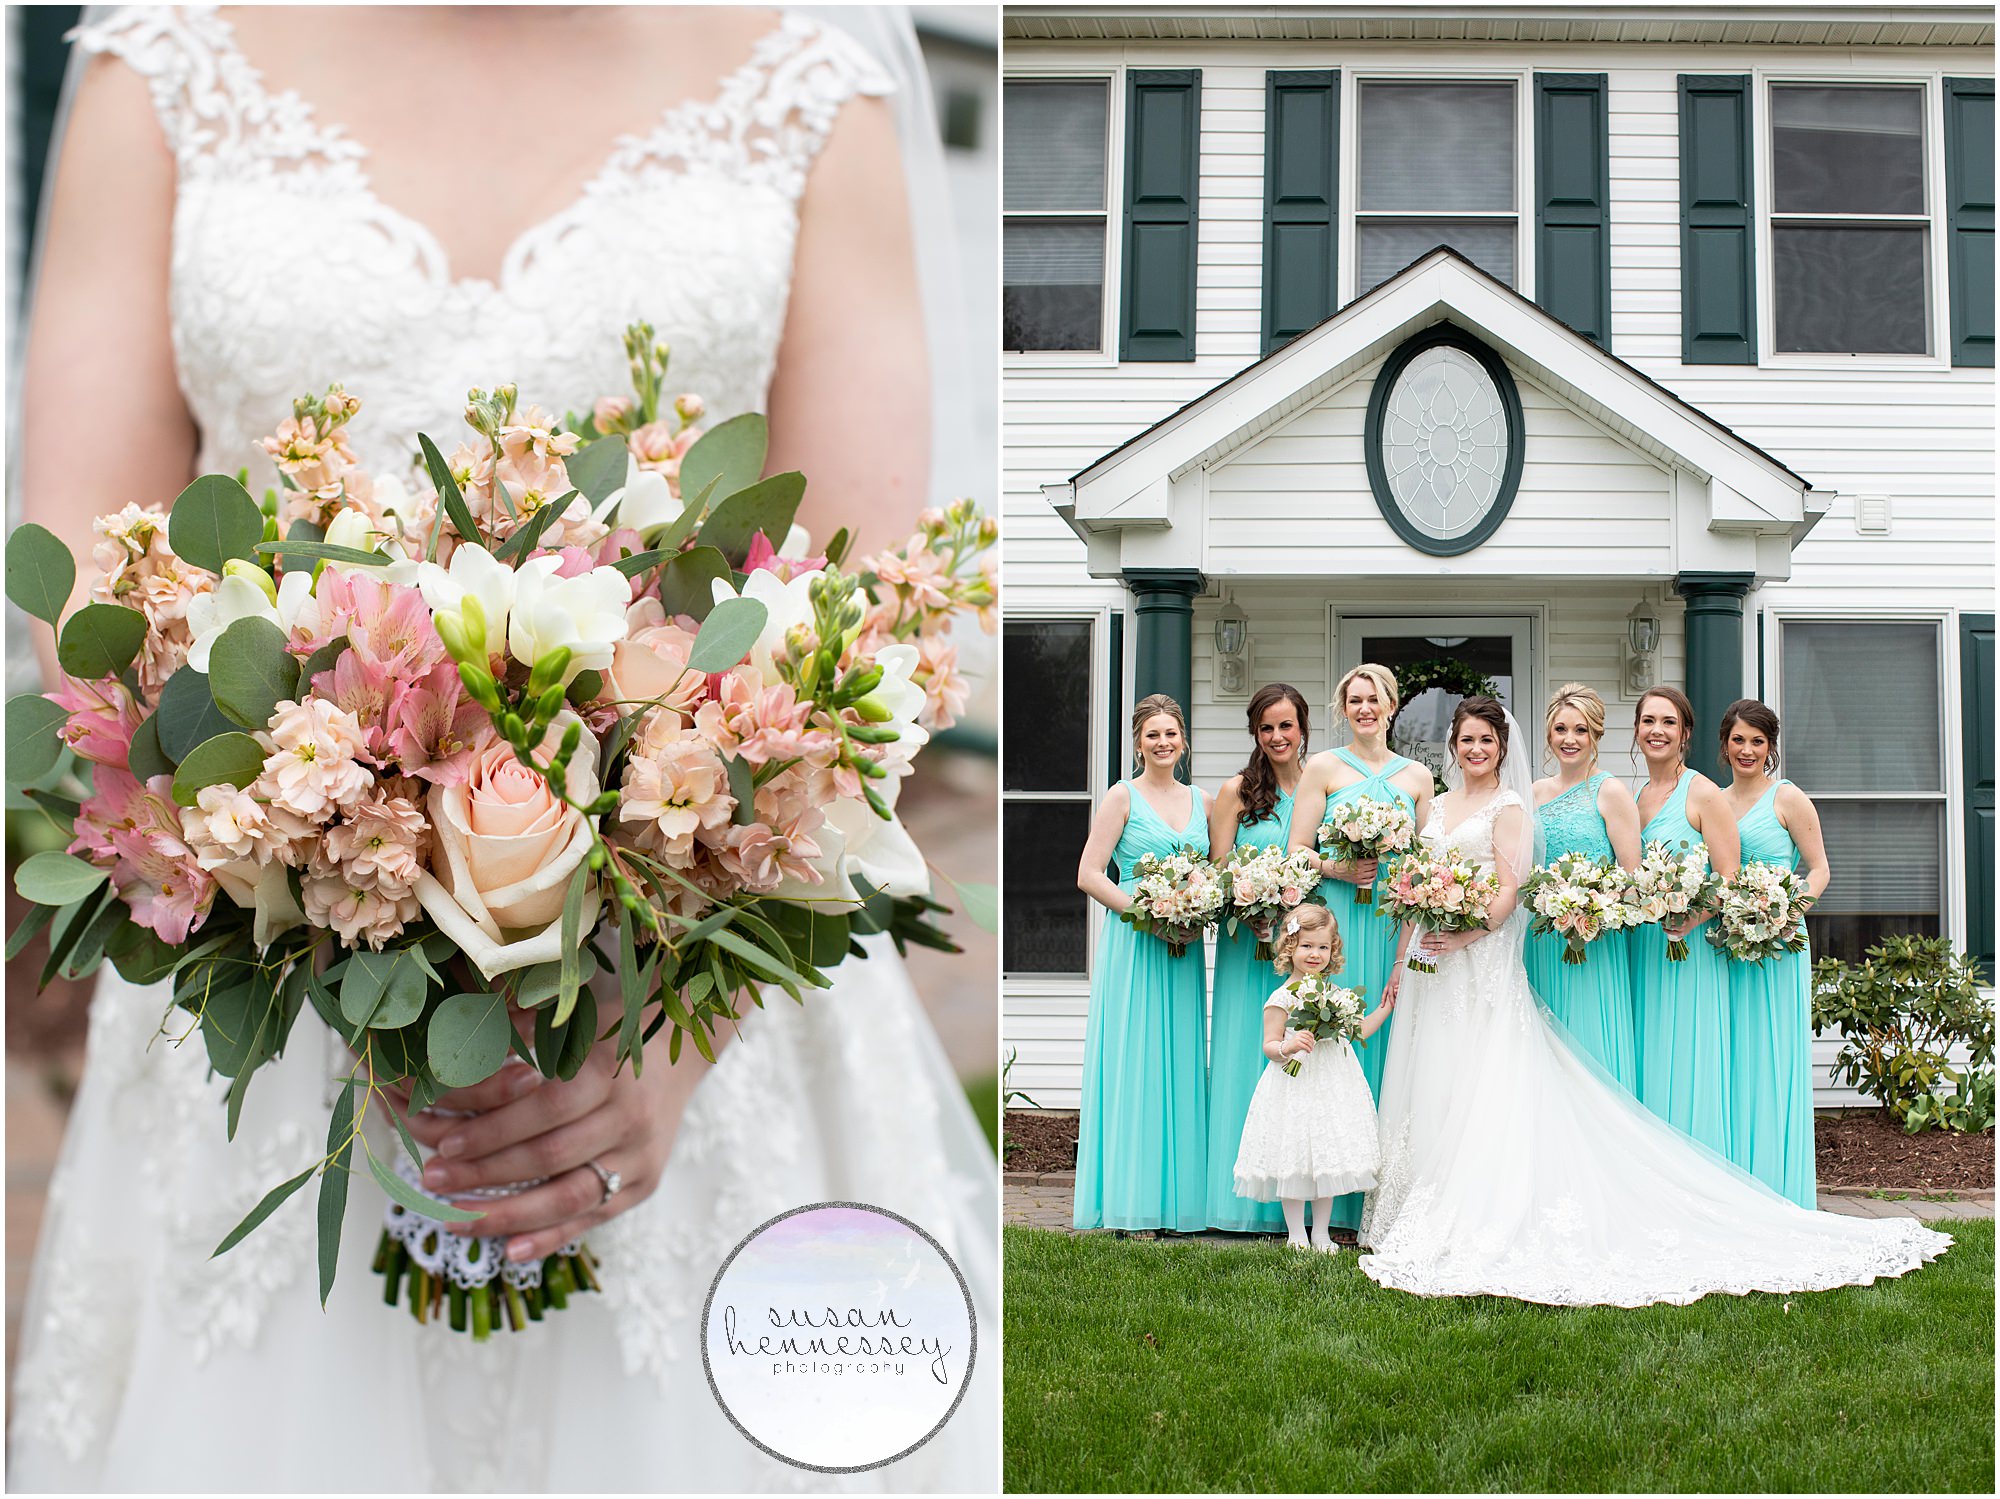 A bride and her Bridal bouquet and bridesmaids in "spa" by david's bridal